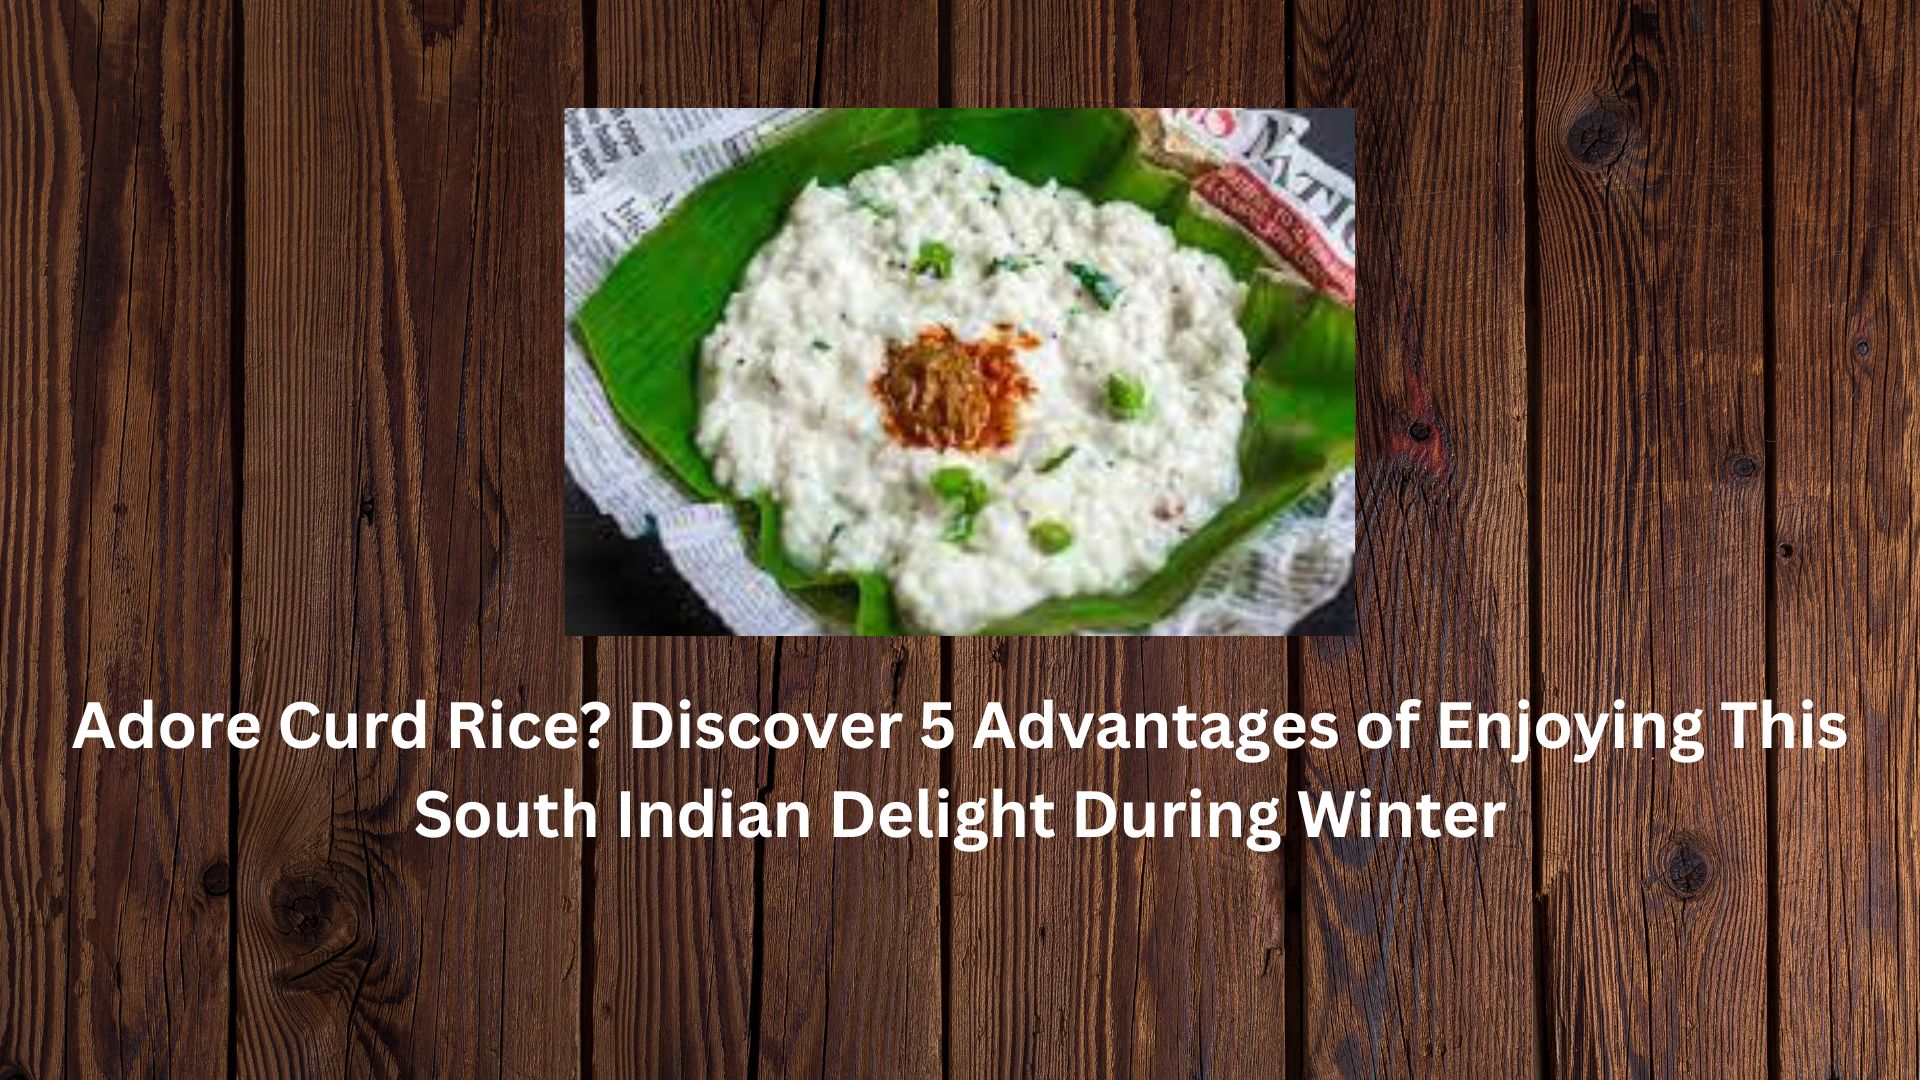 Adore Curd Rice? Discover 5 Advantages of Enjoying This South Indian Delight During Winter